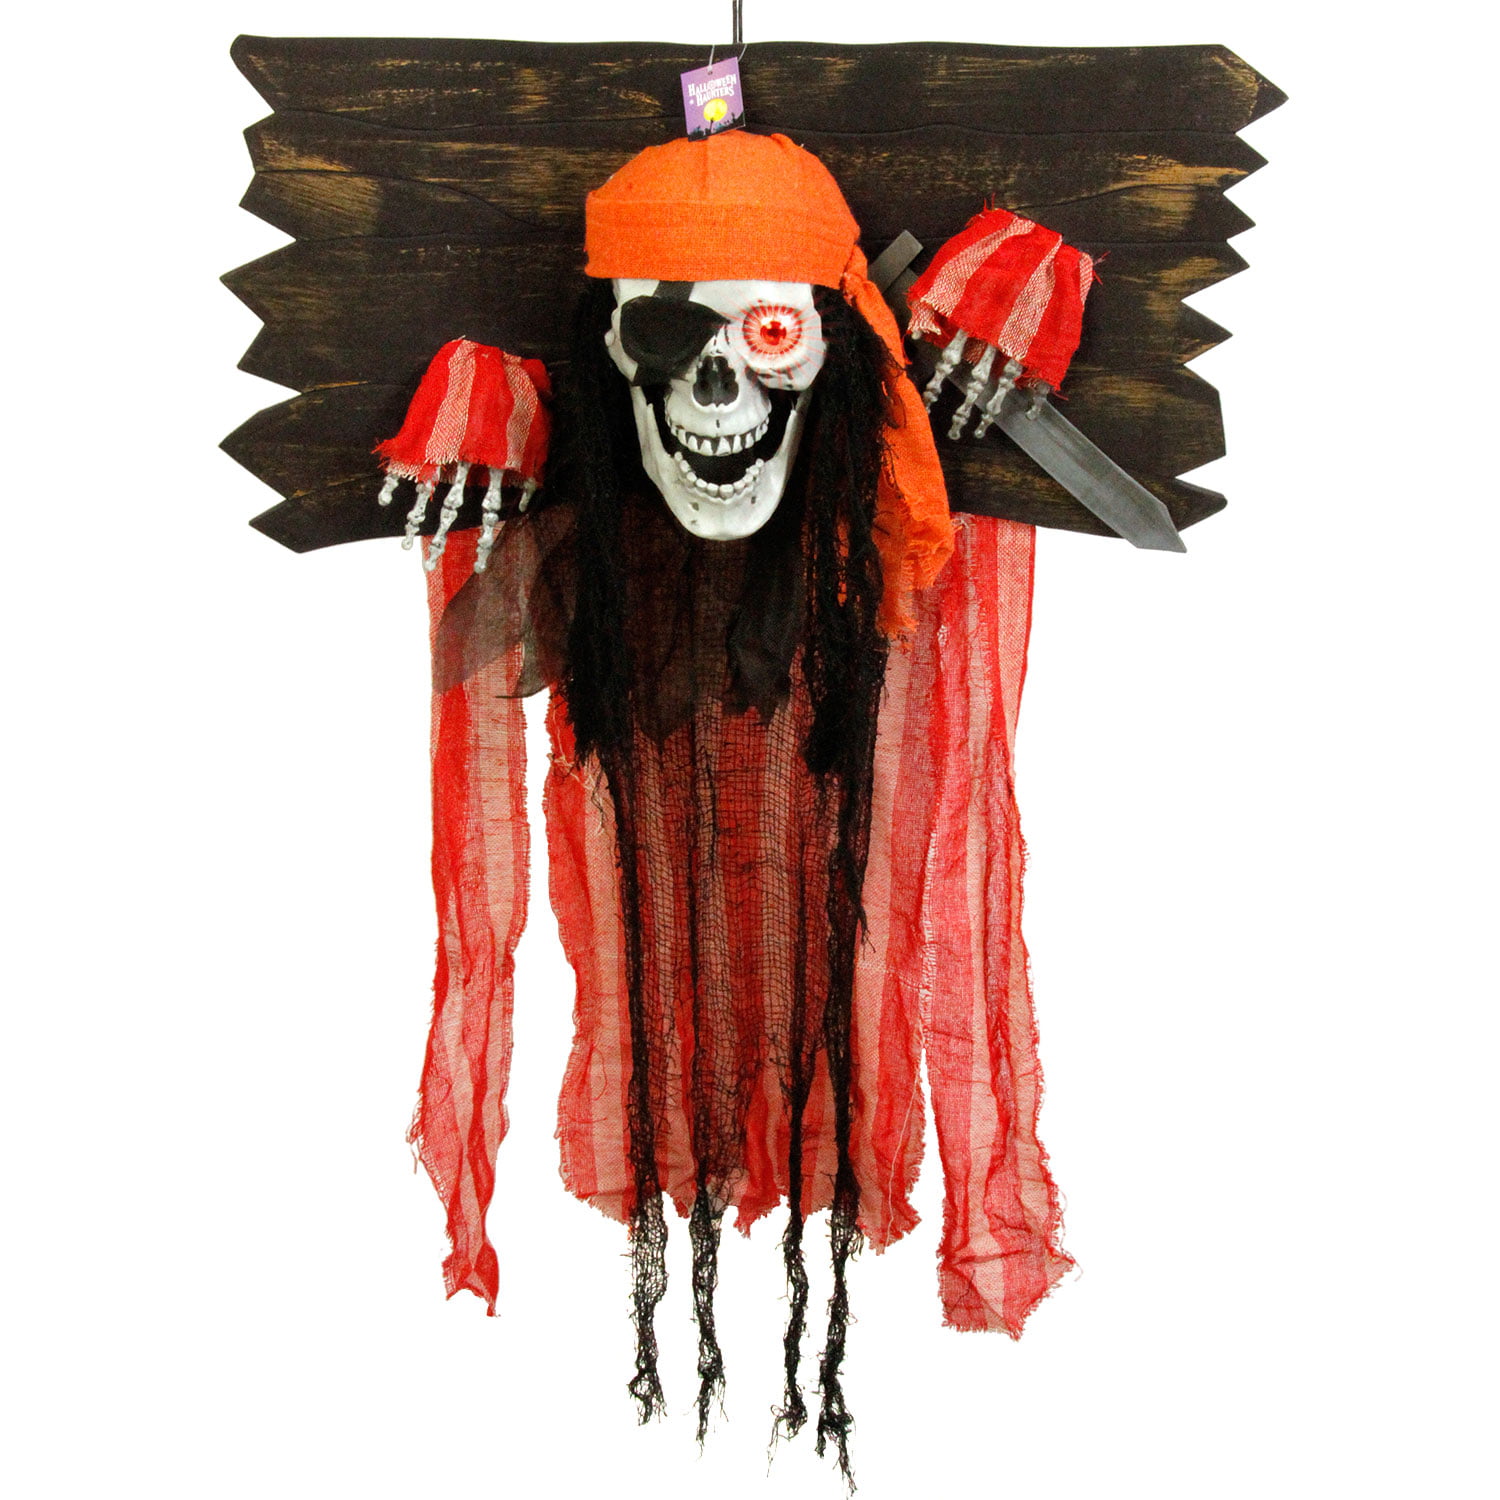 Details about   26 In Standing Peg Creepy Eg Pirate Halloween Indoor Decoration 